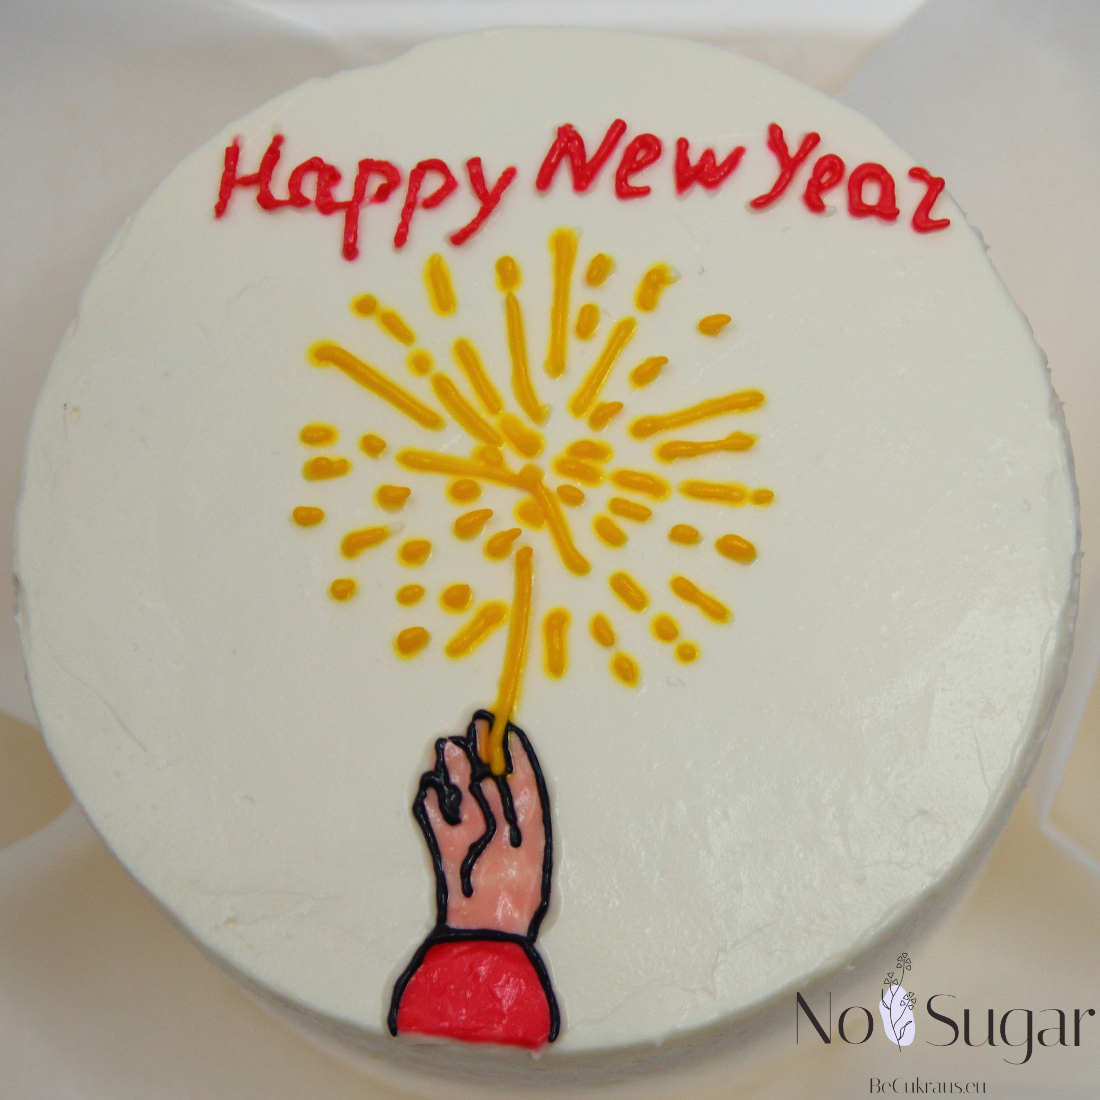 Sparklers on a Happy New Year bento cake